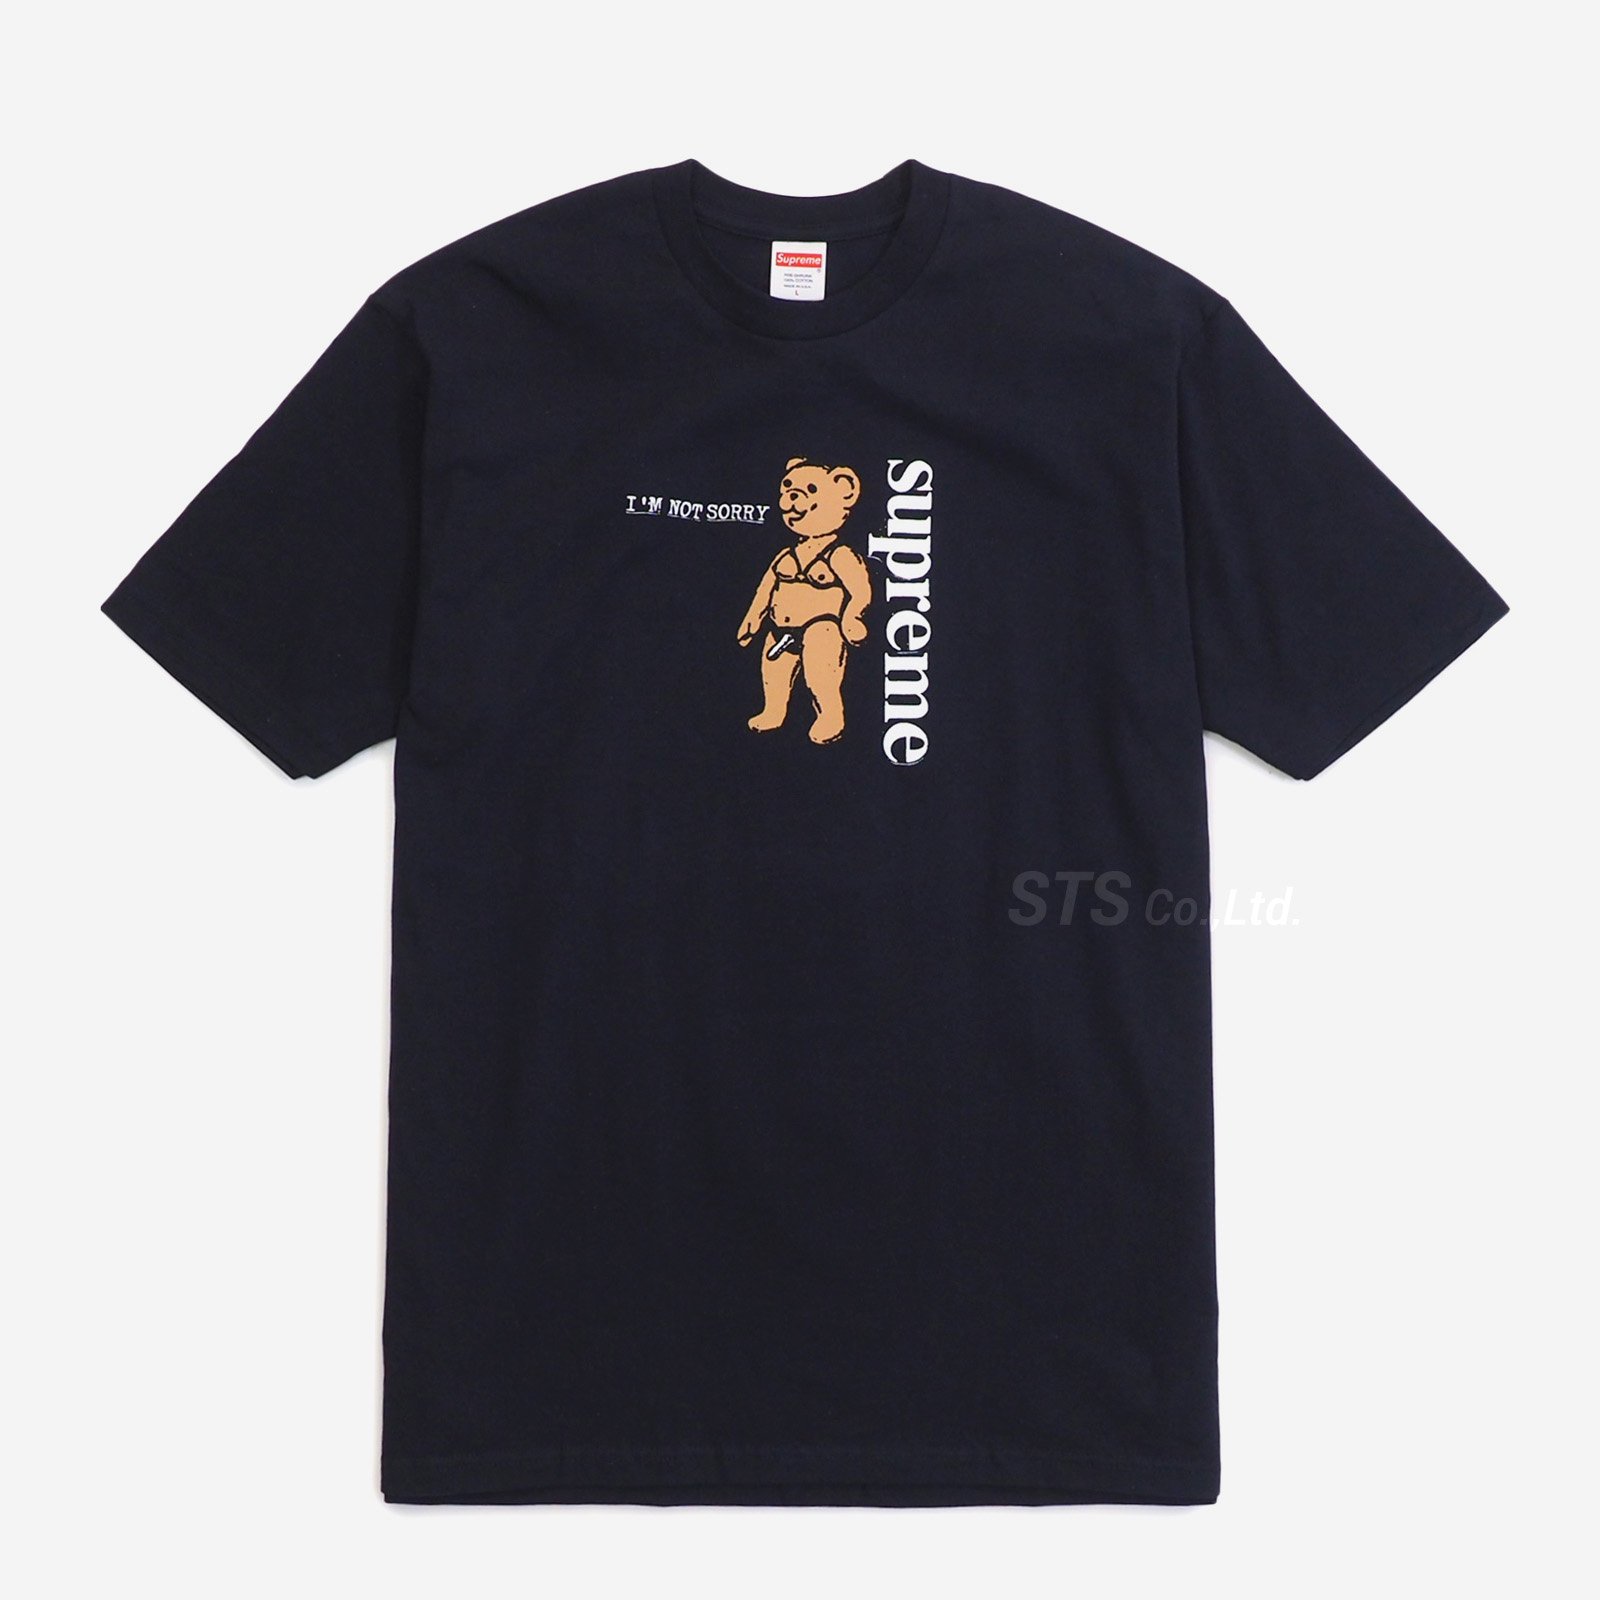 supreme Not Sorry Tee 黒 M ピンズ 付き tシャツ - Tシャツ